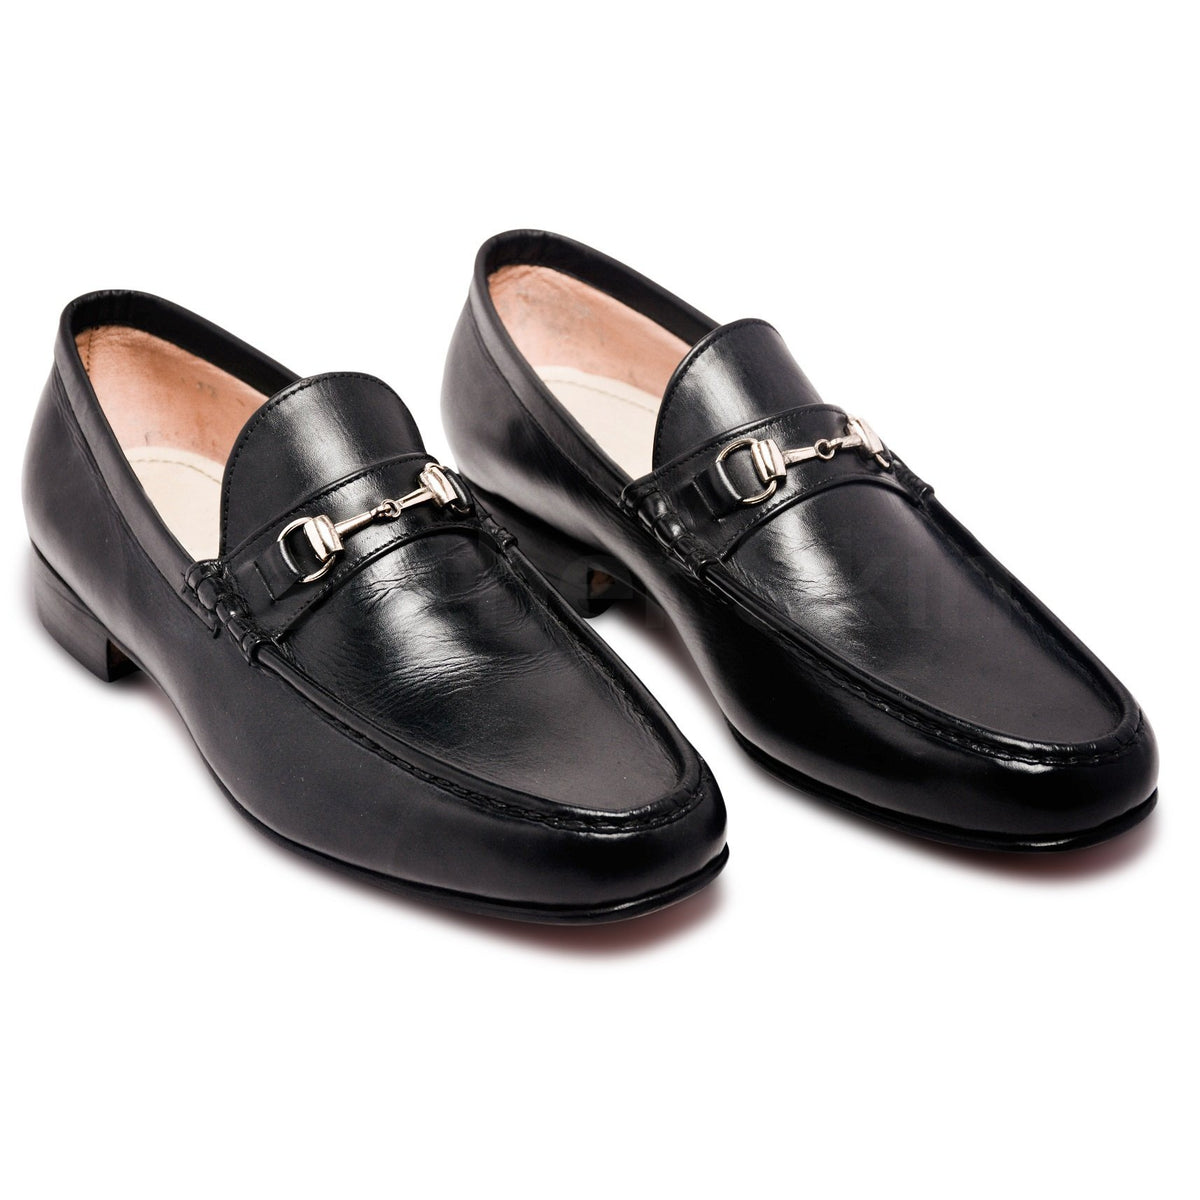 Black Loafers Shoes with Gold Metal Decoration - Leather Skin Shop